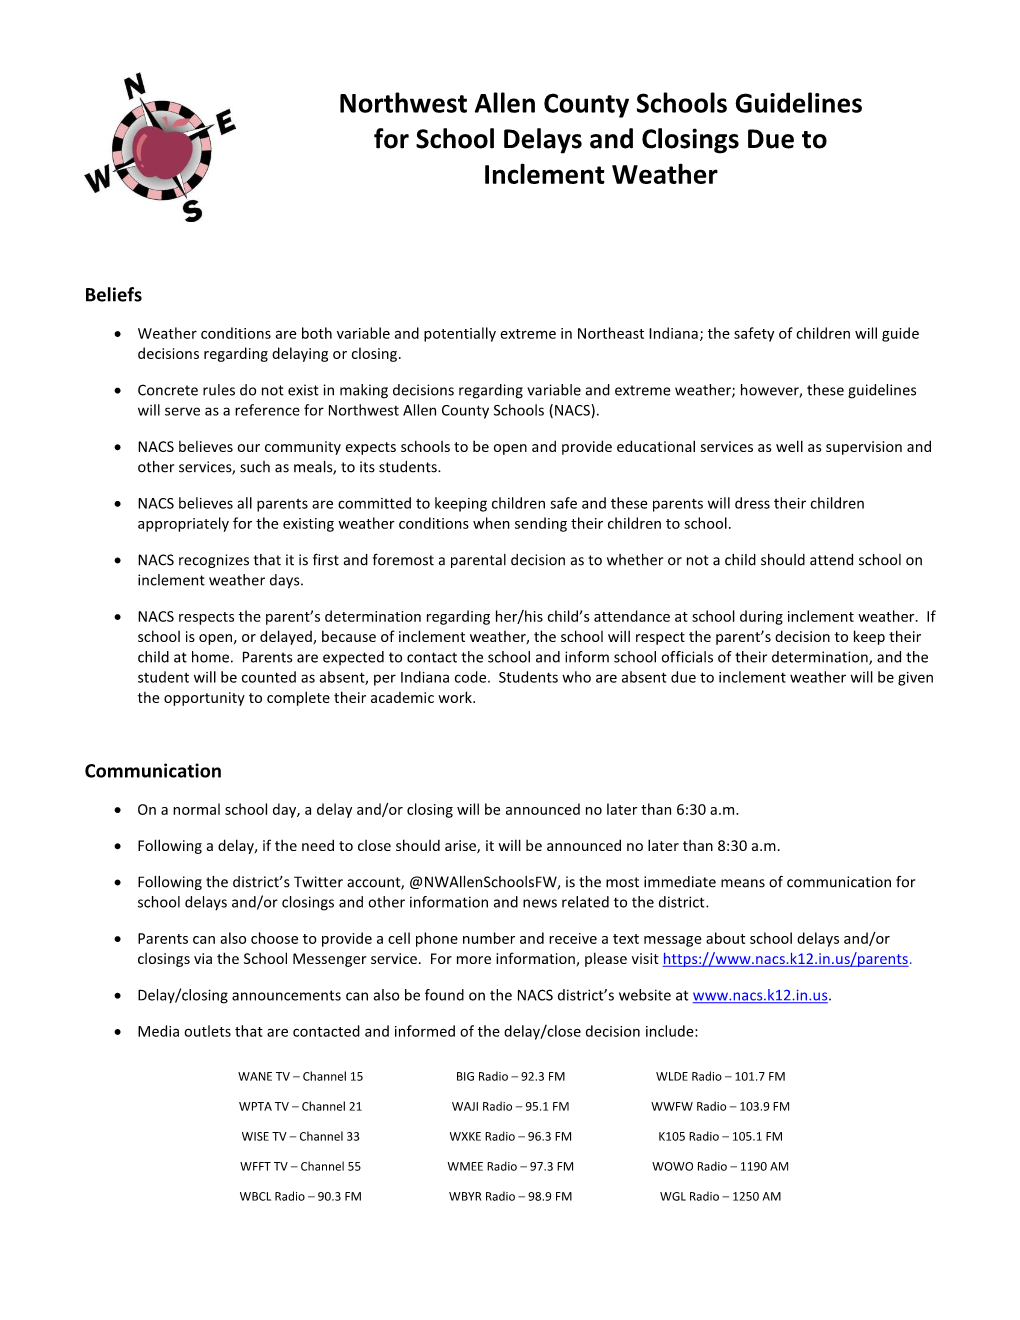 Northwest Allen County Schools Guidelines for School Delays and Closings Due to Inclement Weather